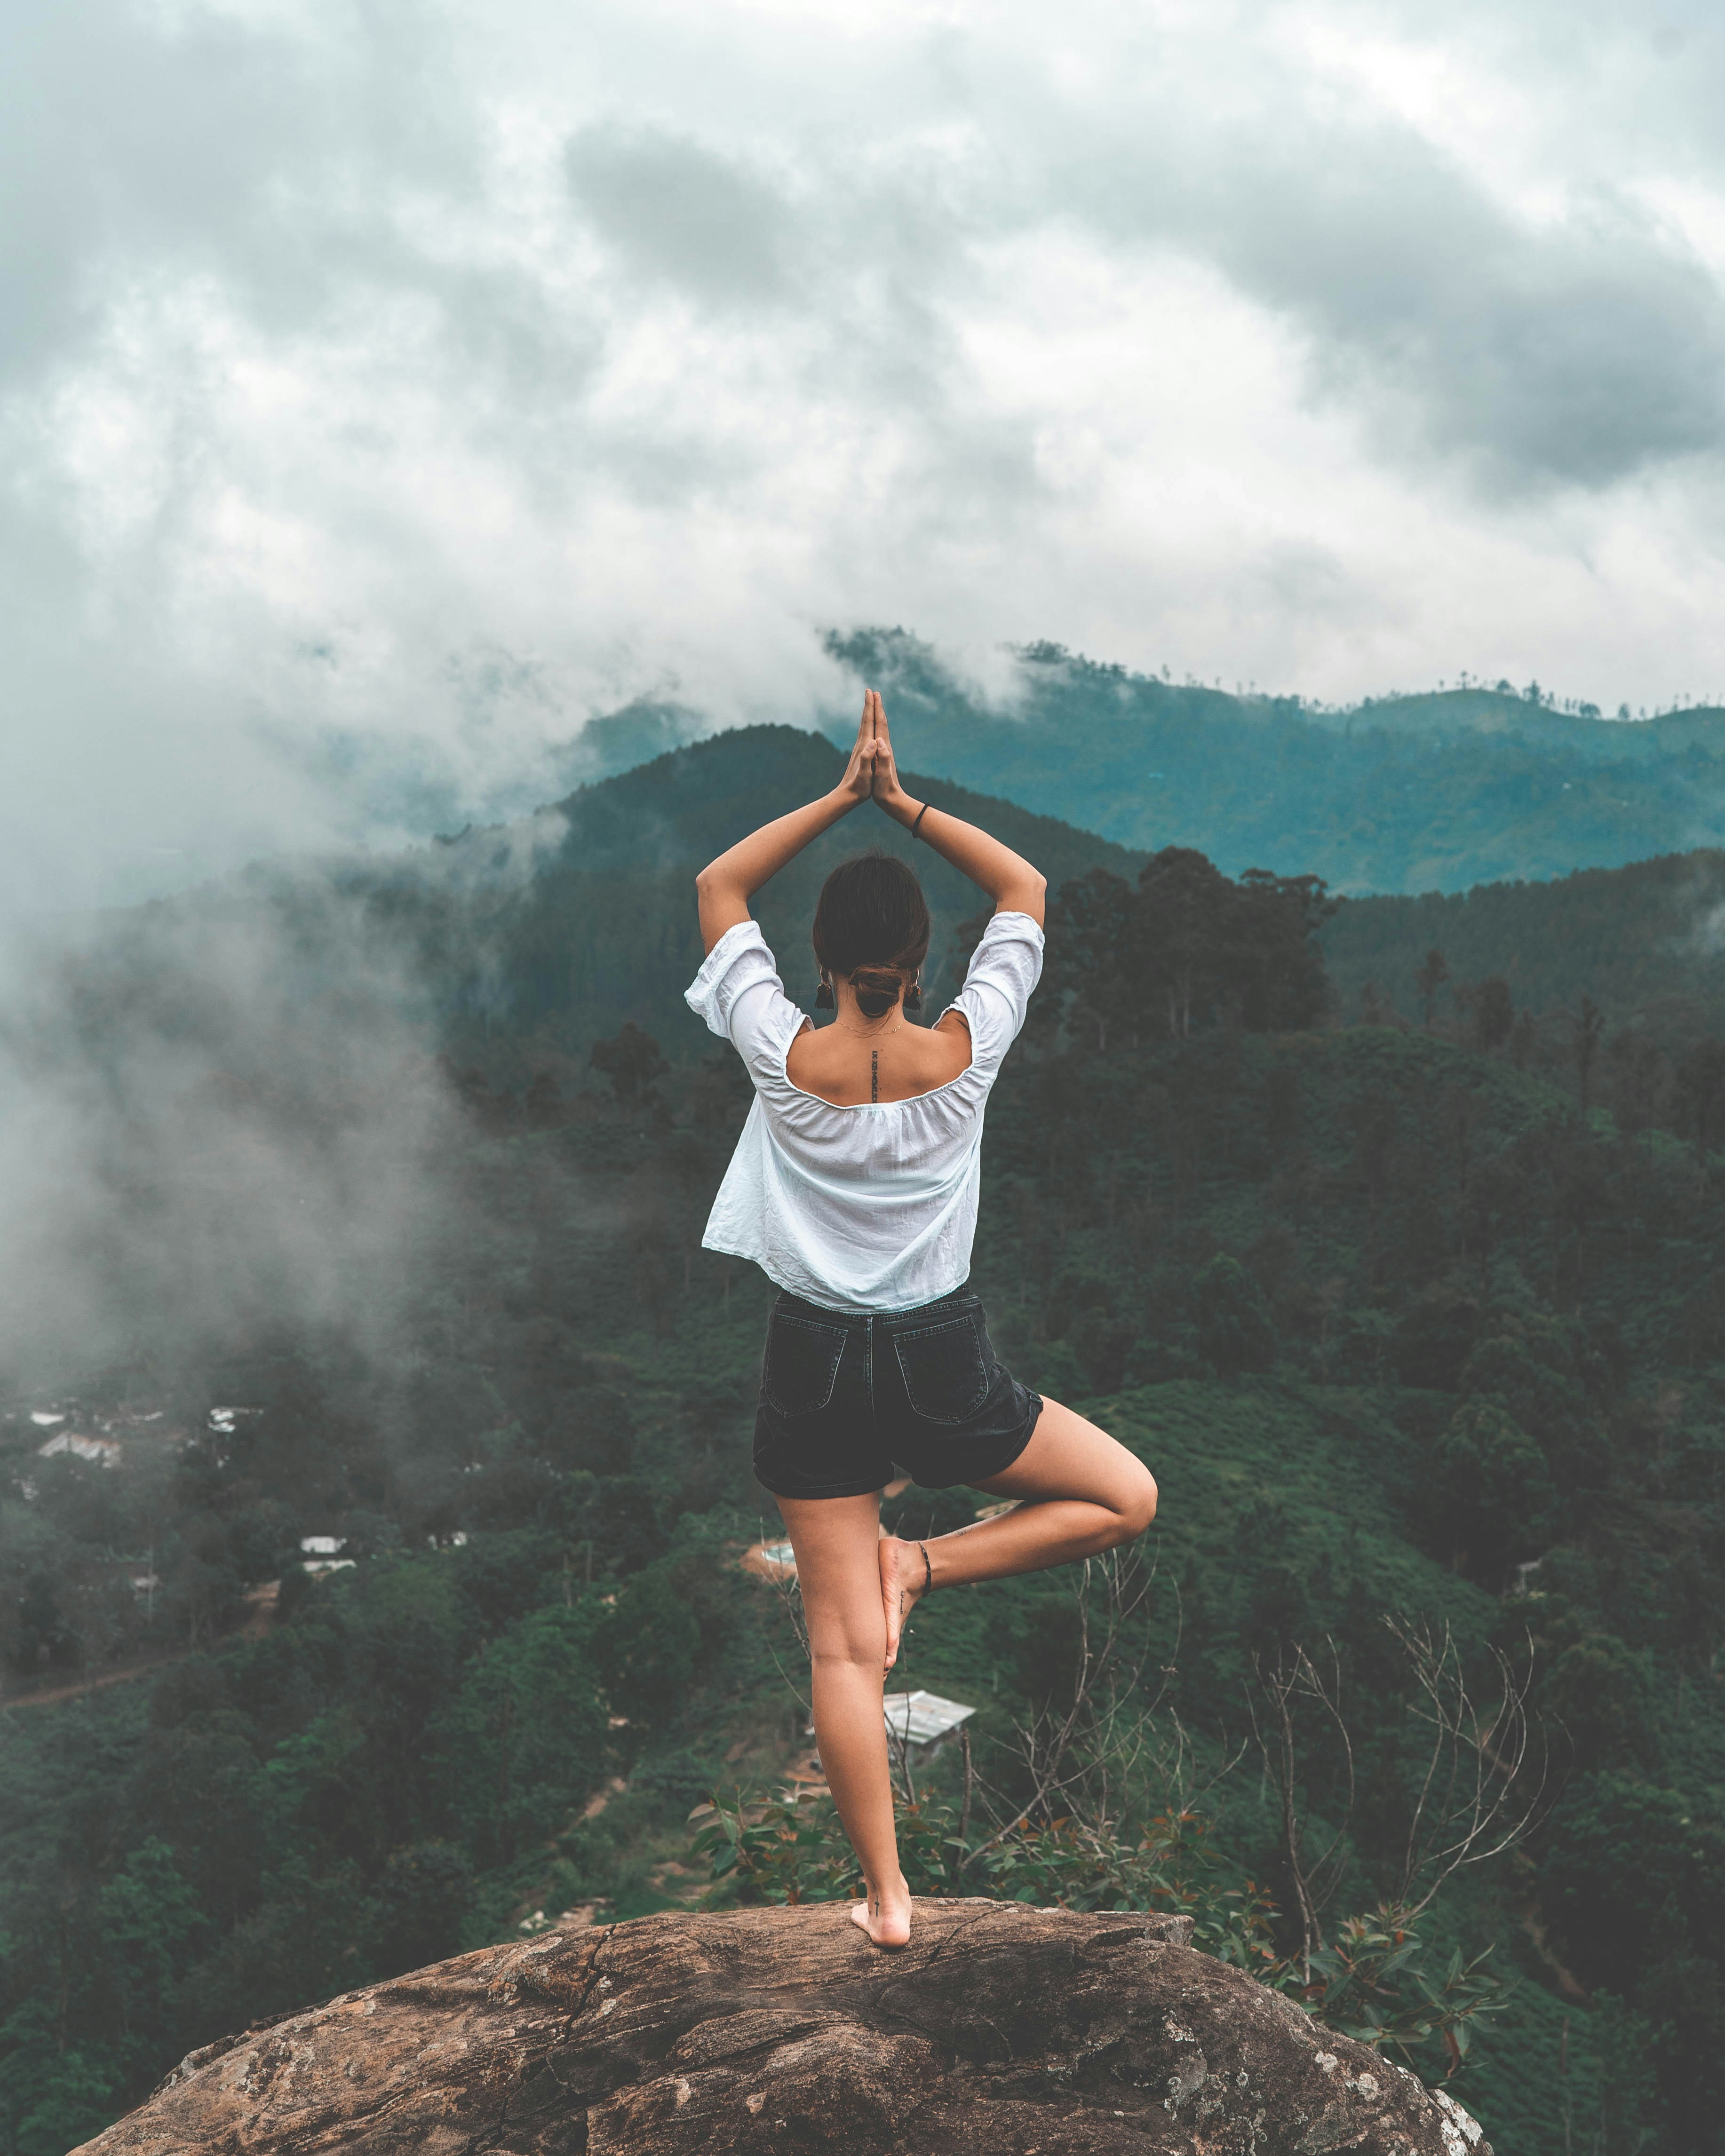 Choose from a curated selection of yoga photos. Always free on Unsplash.